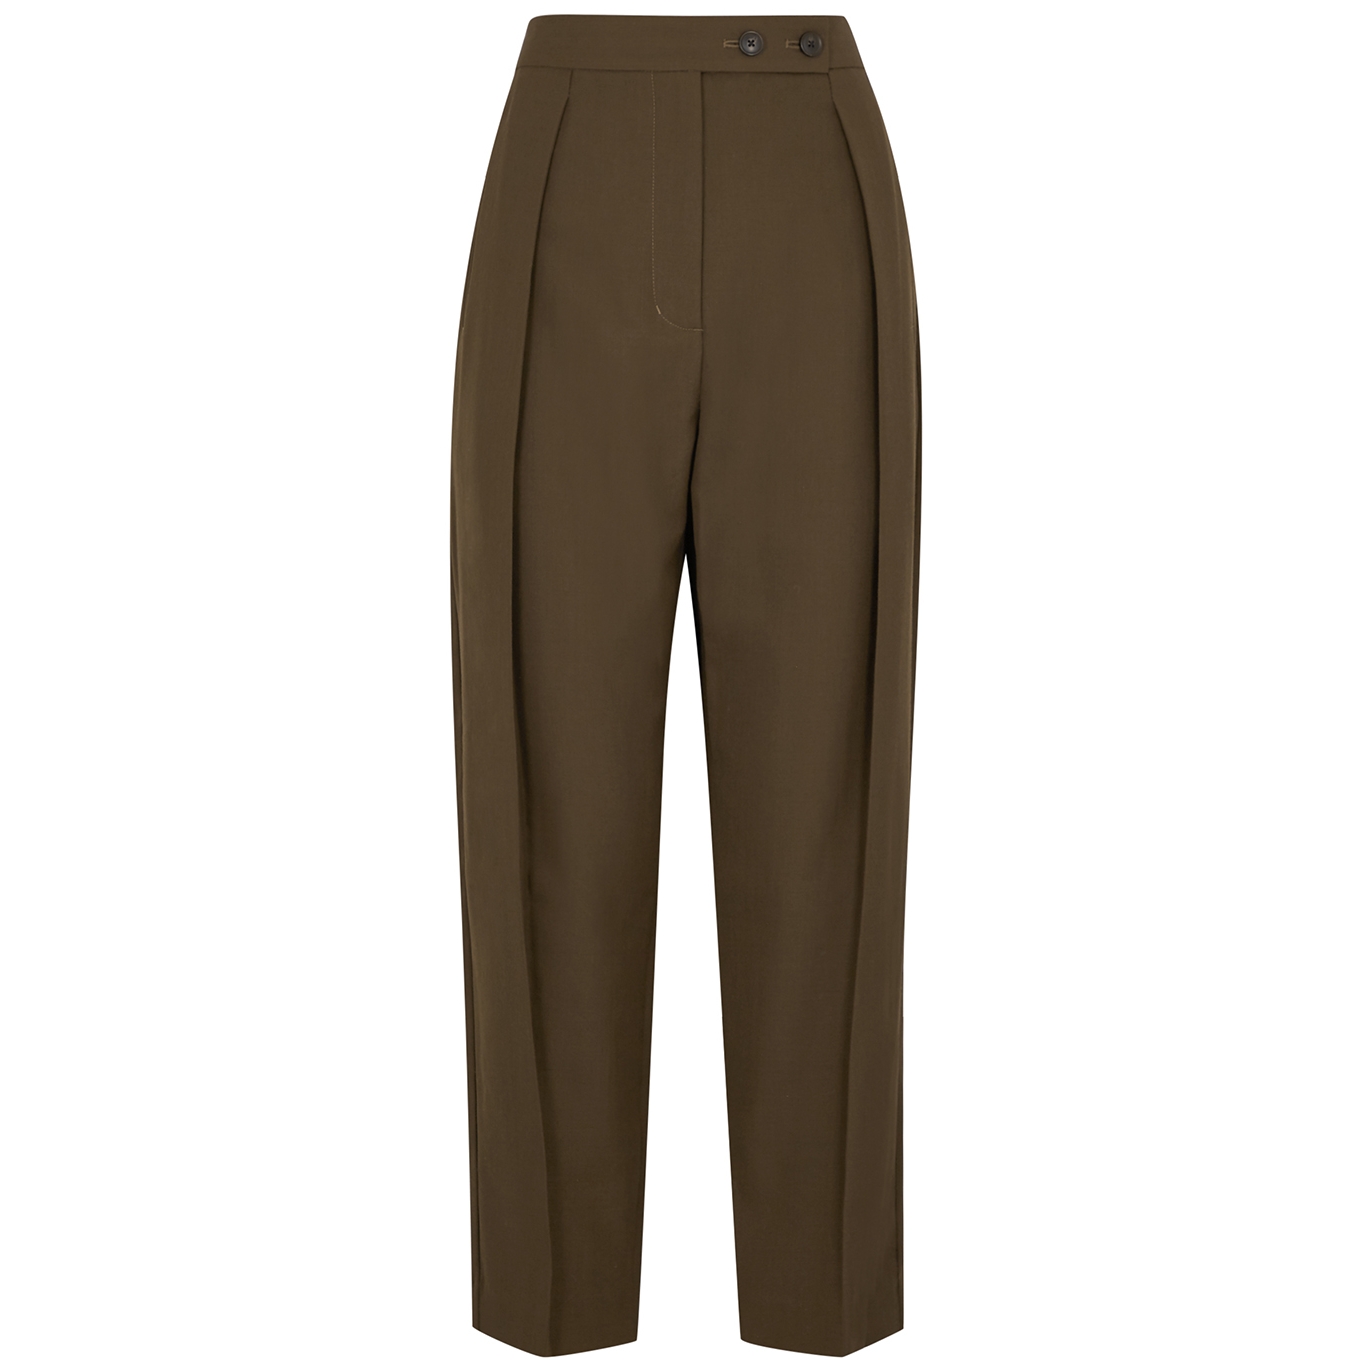 3.1 Phillip Lim Brown Cropped Woven Trousers - Dark Brown - 8